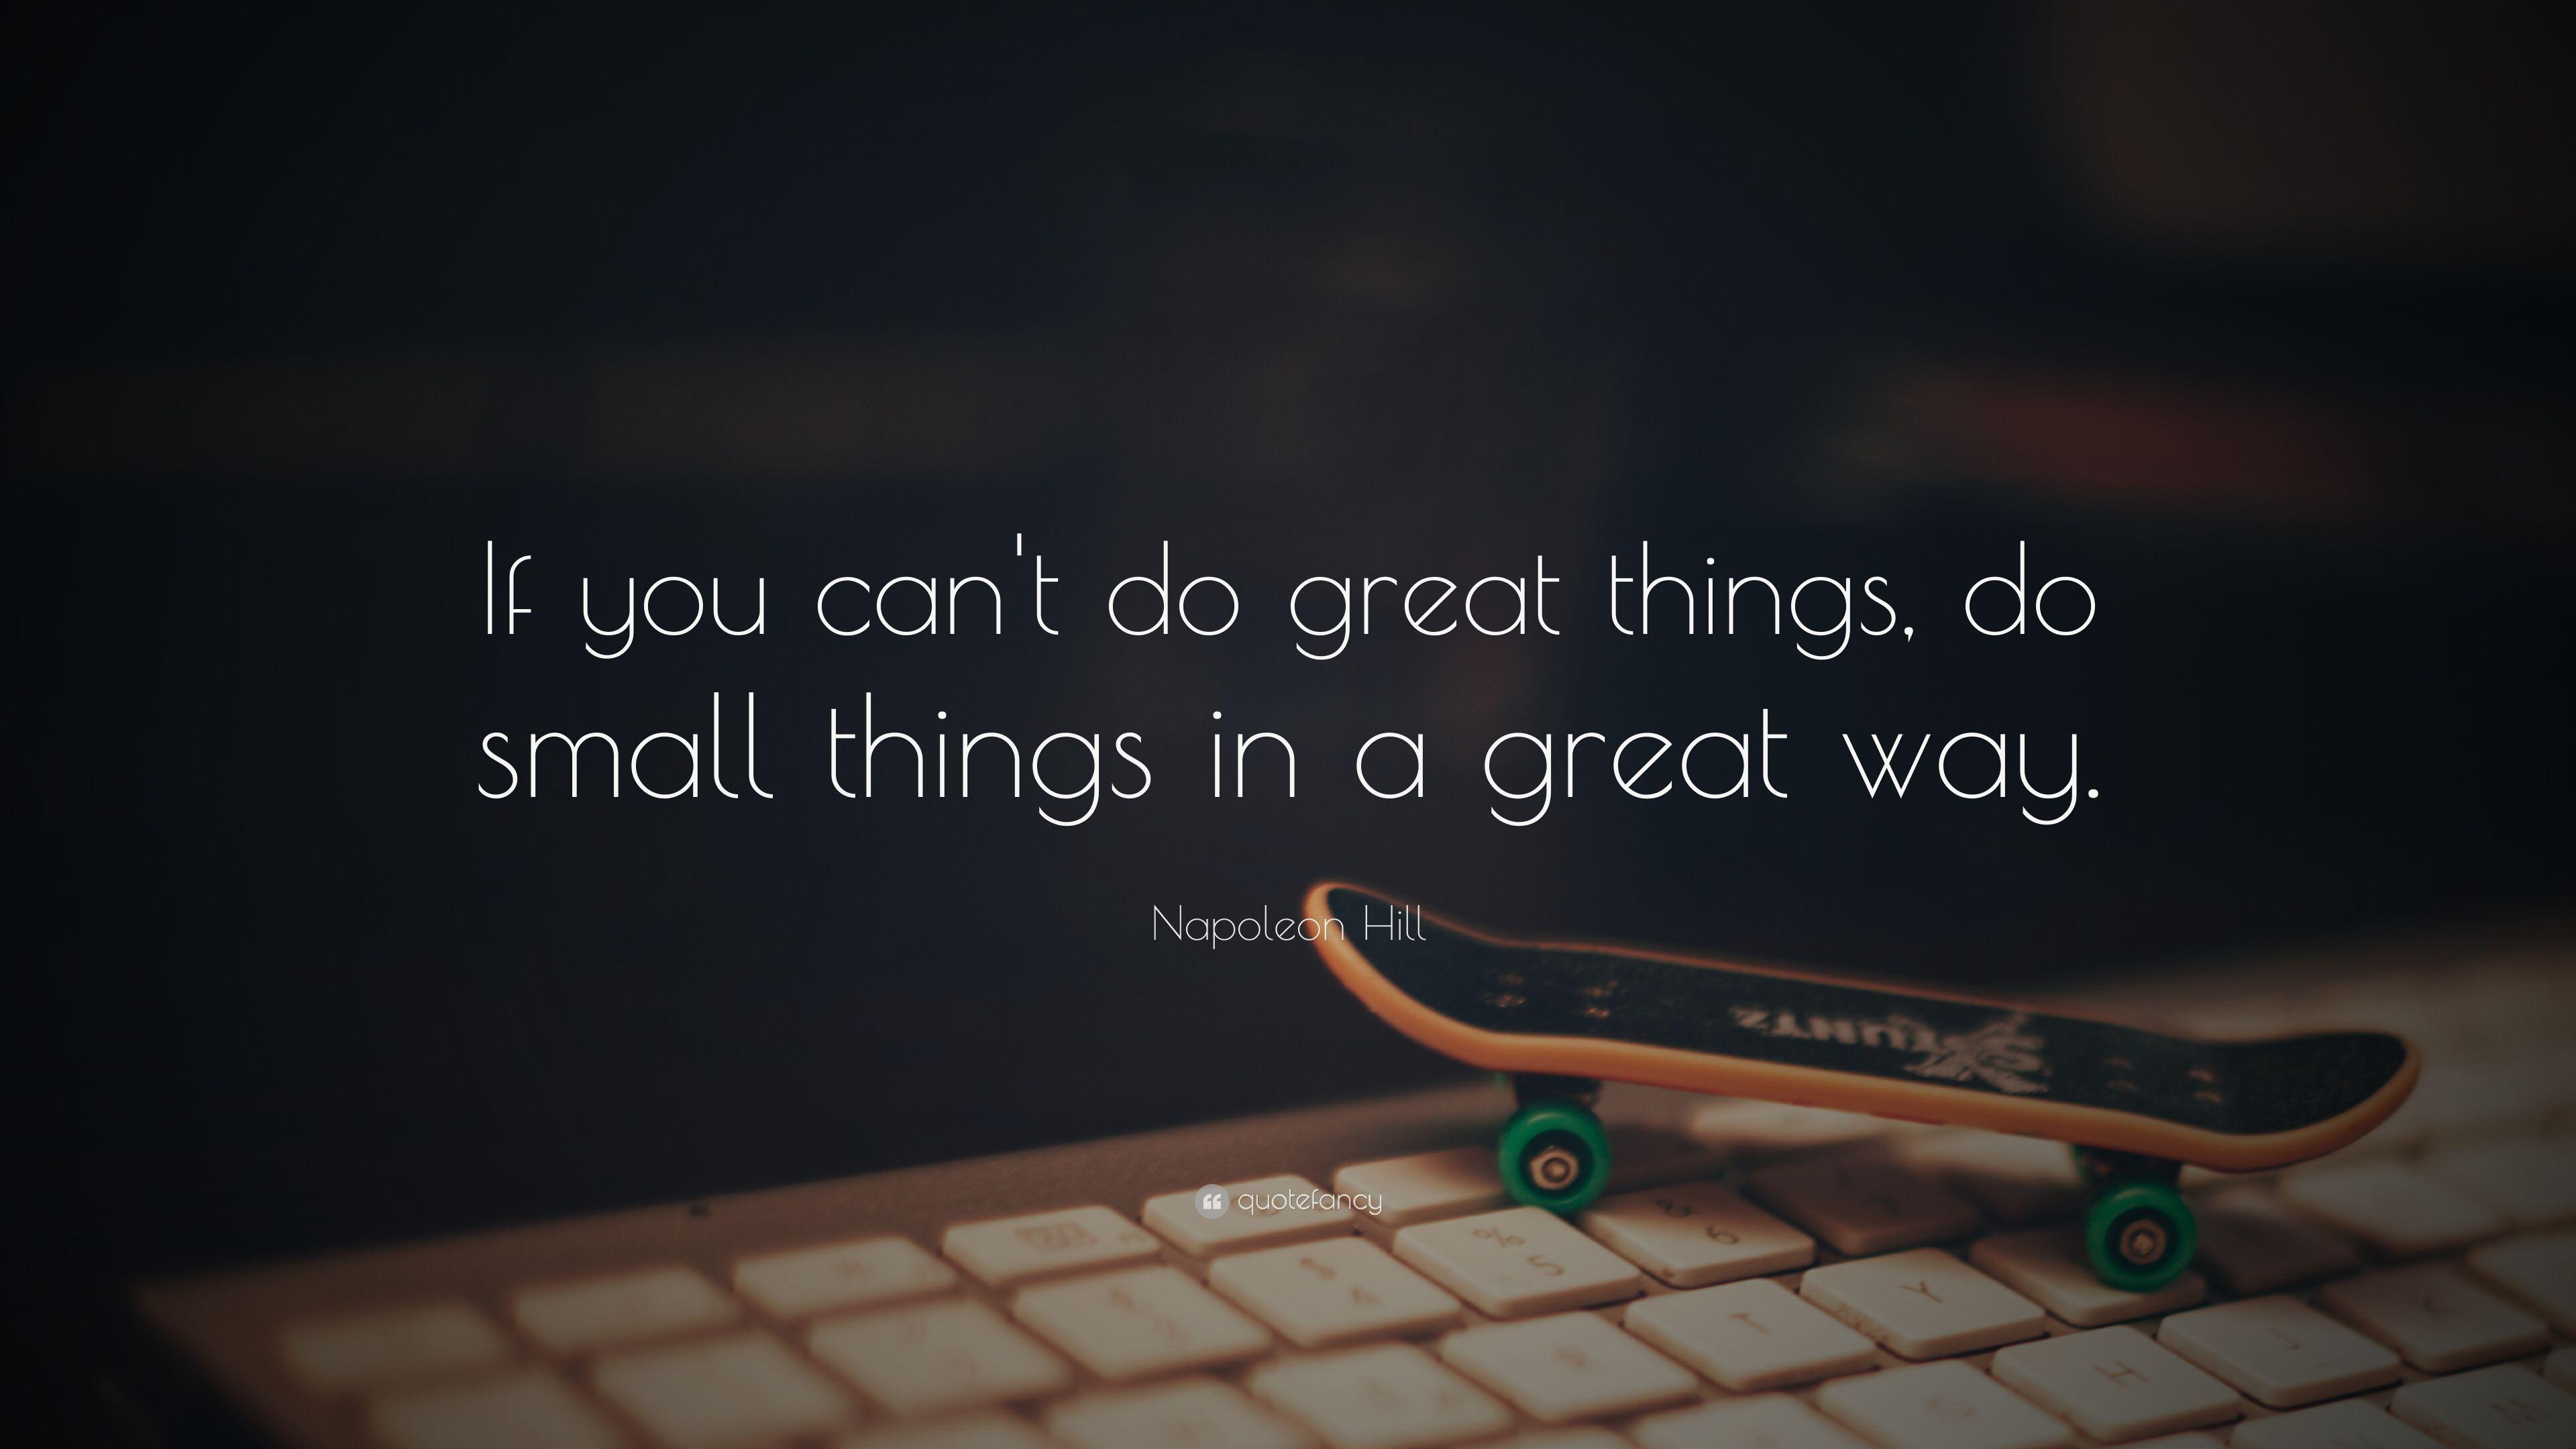 quotefancy» 1080P, 2k, 4k Full HD Wallpapers, Backgrounds Free Download |  Wallpaper Crafter